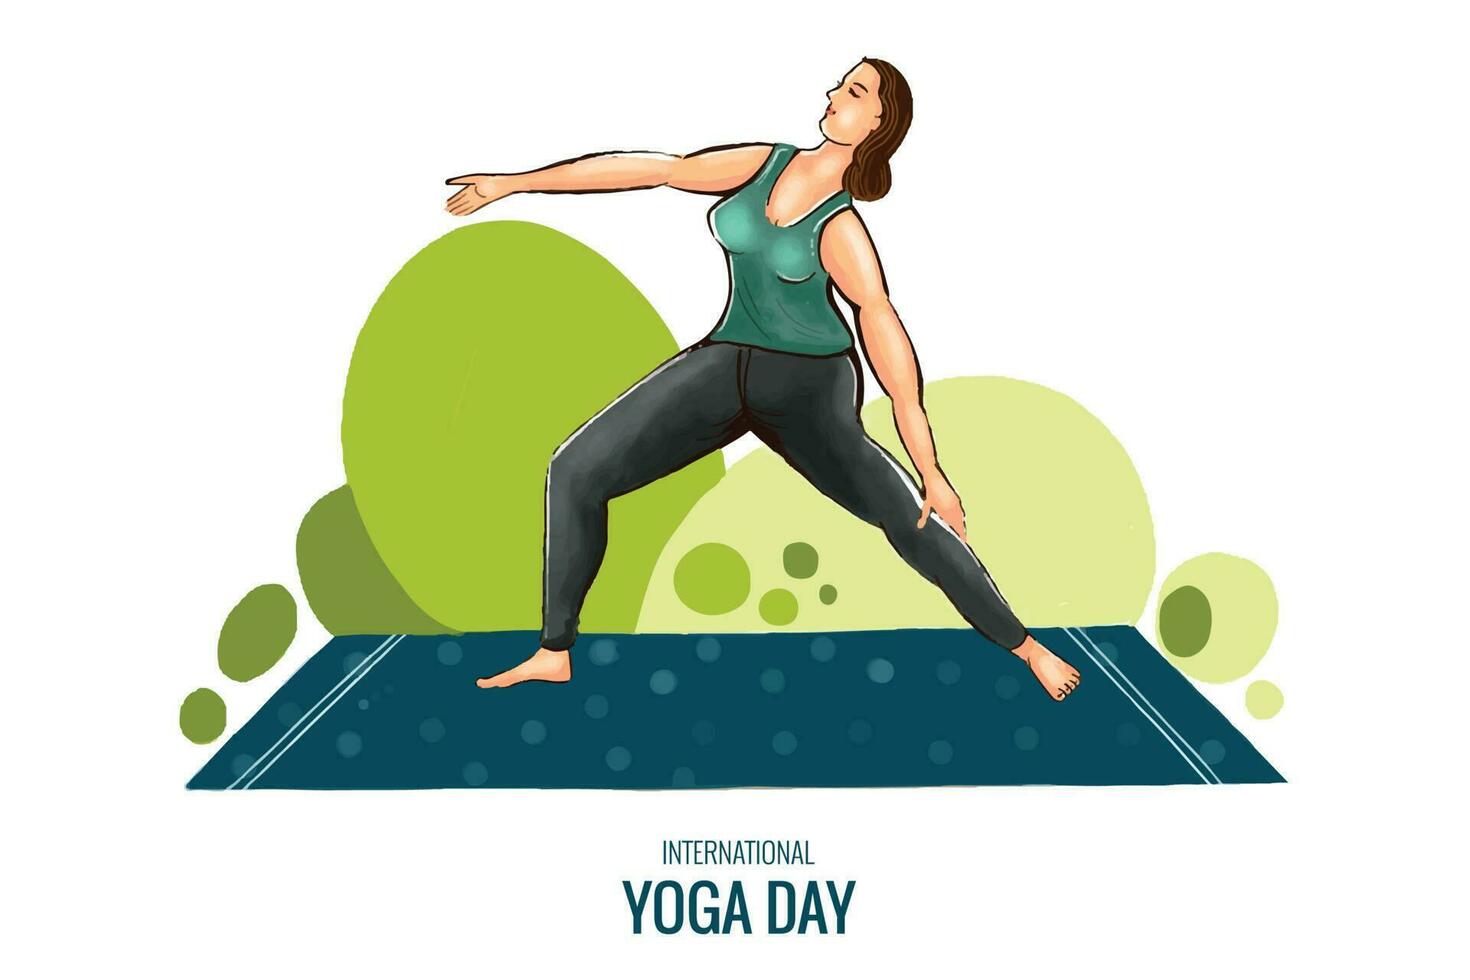 Illustration of young woman doing asana for international yoga day background vector